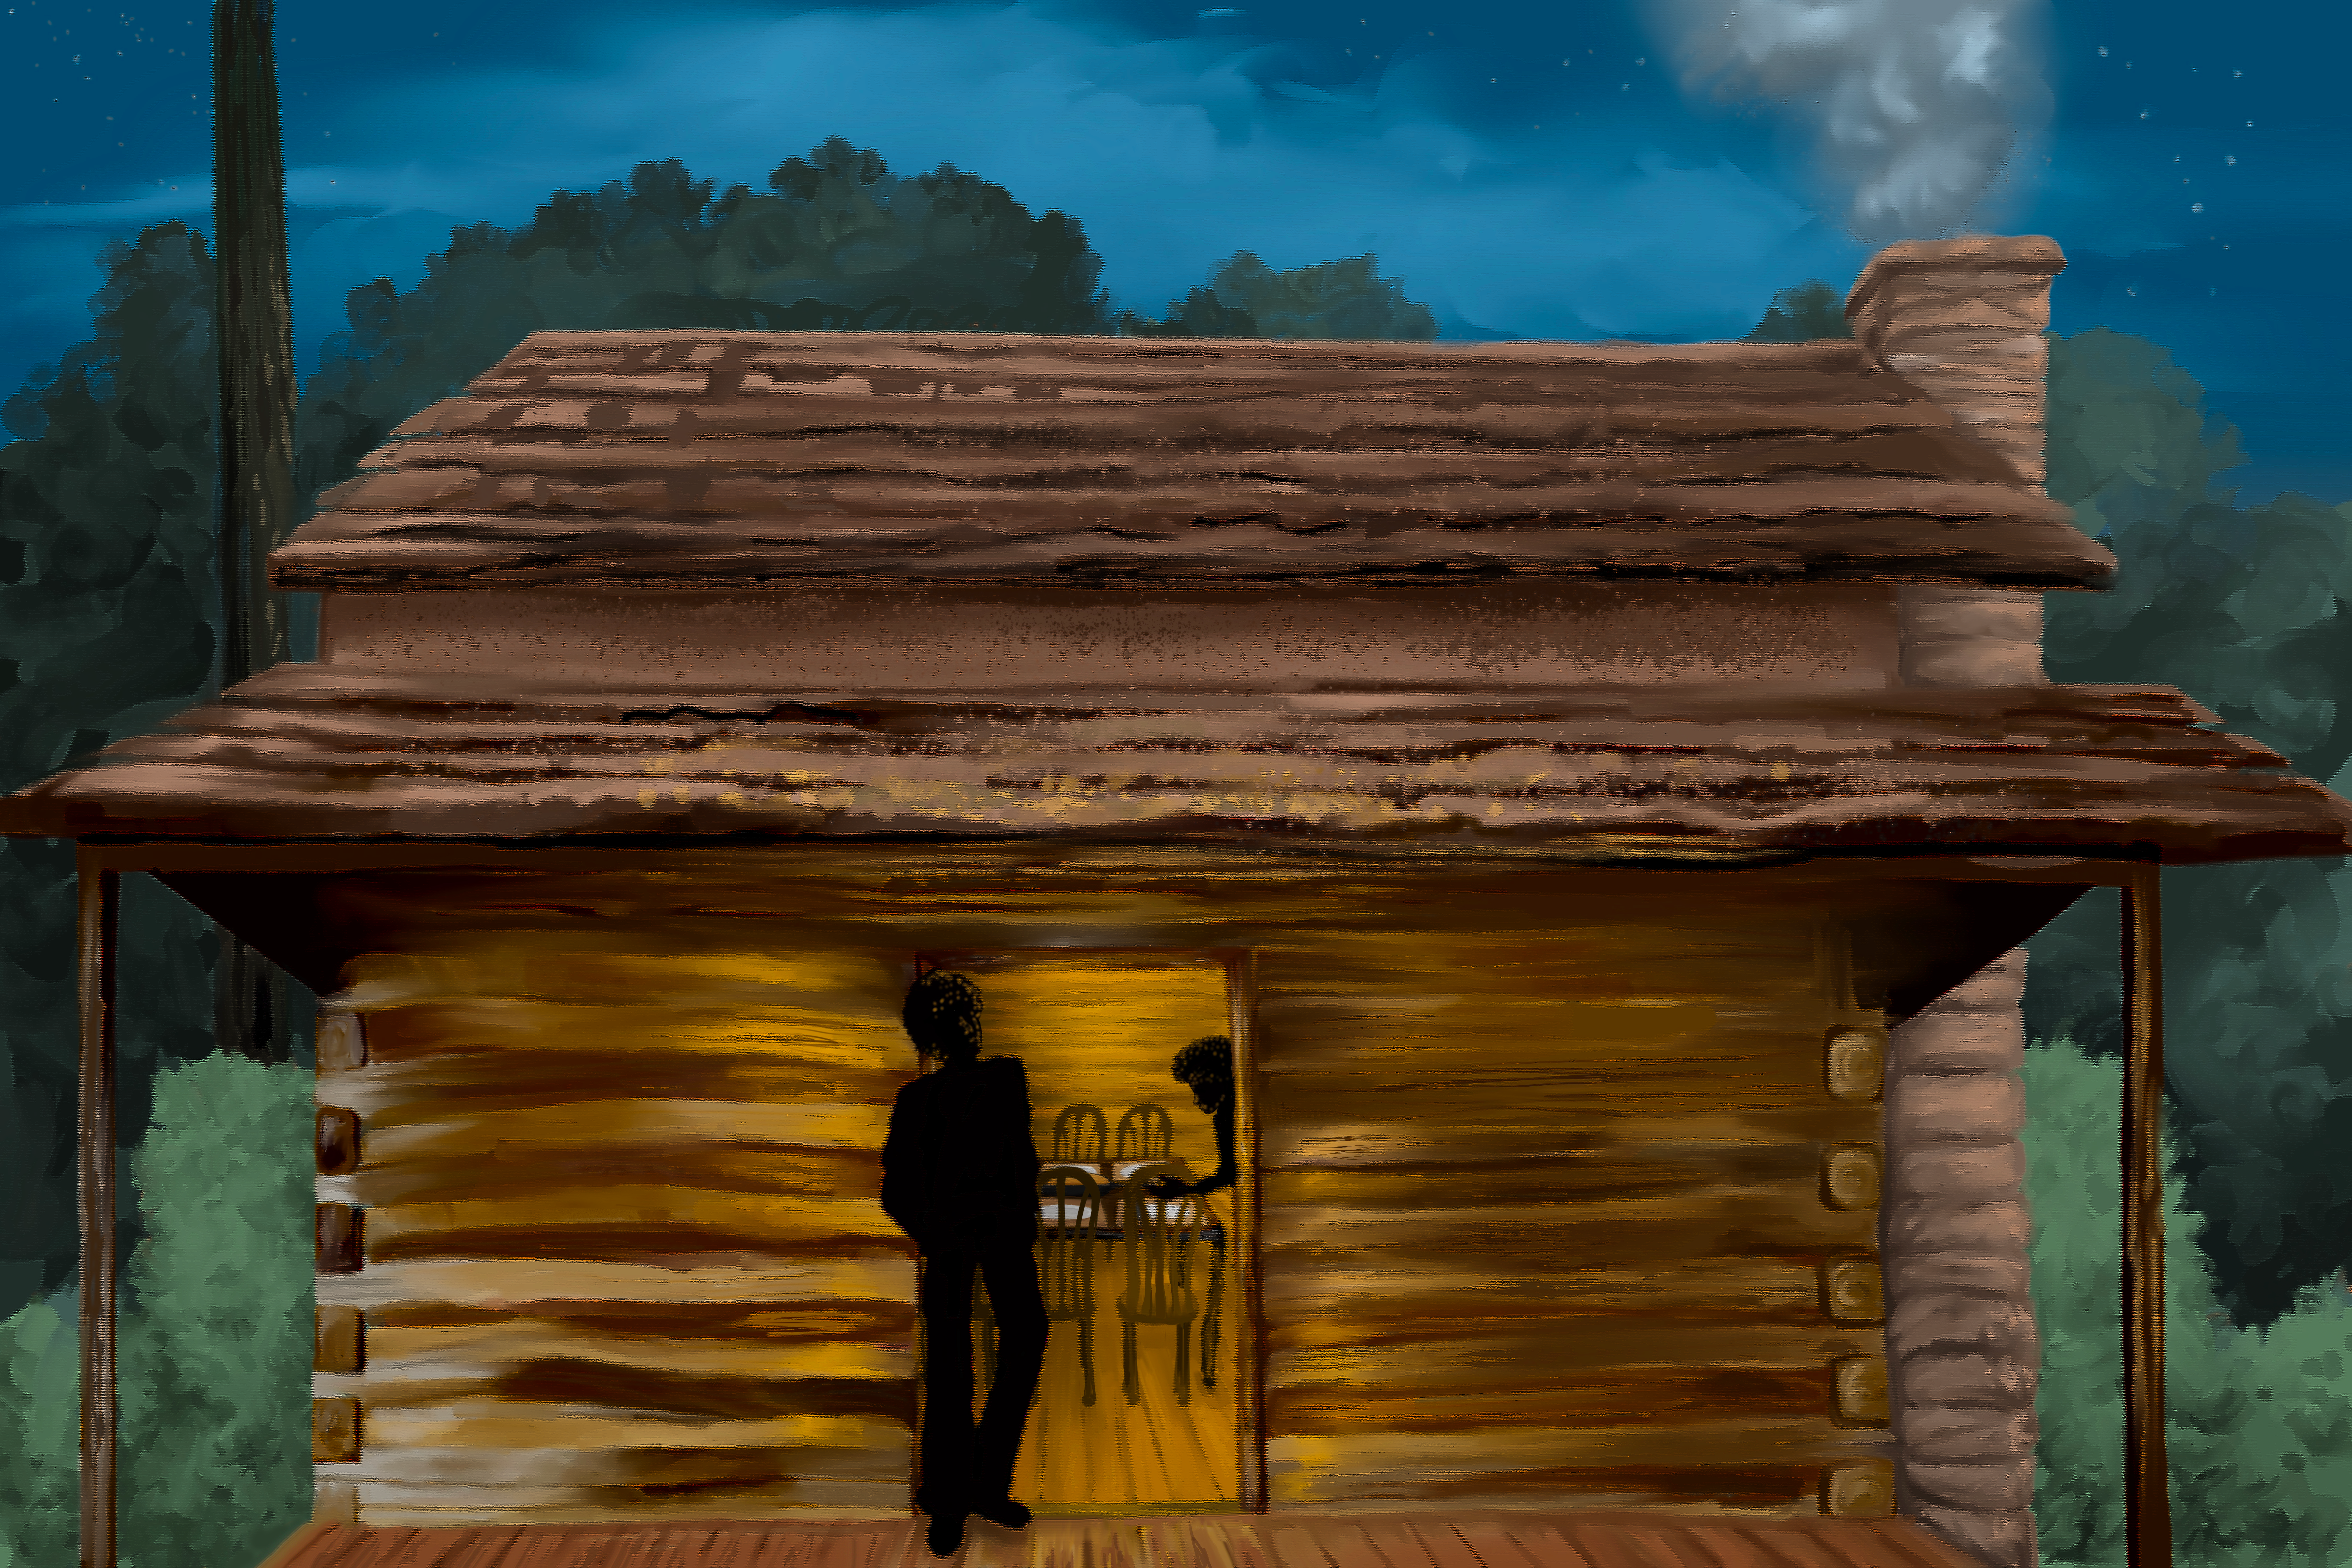 A artist depiction of the Turner Family's Cabin